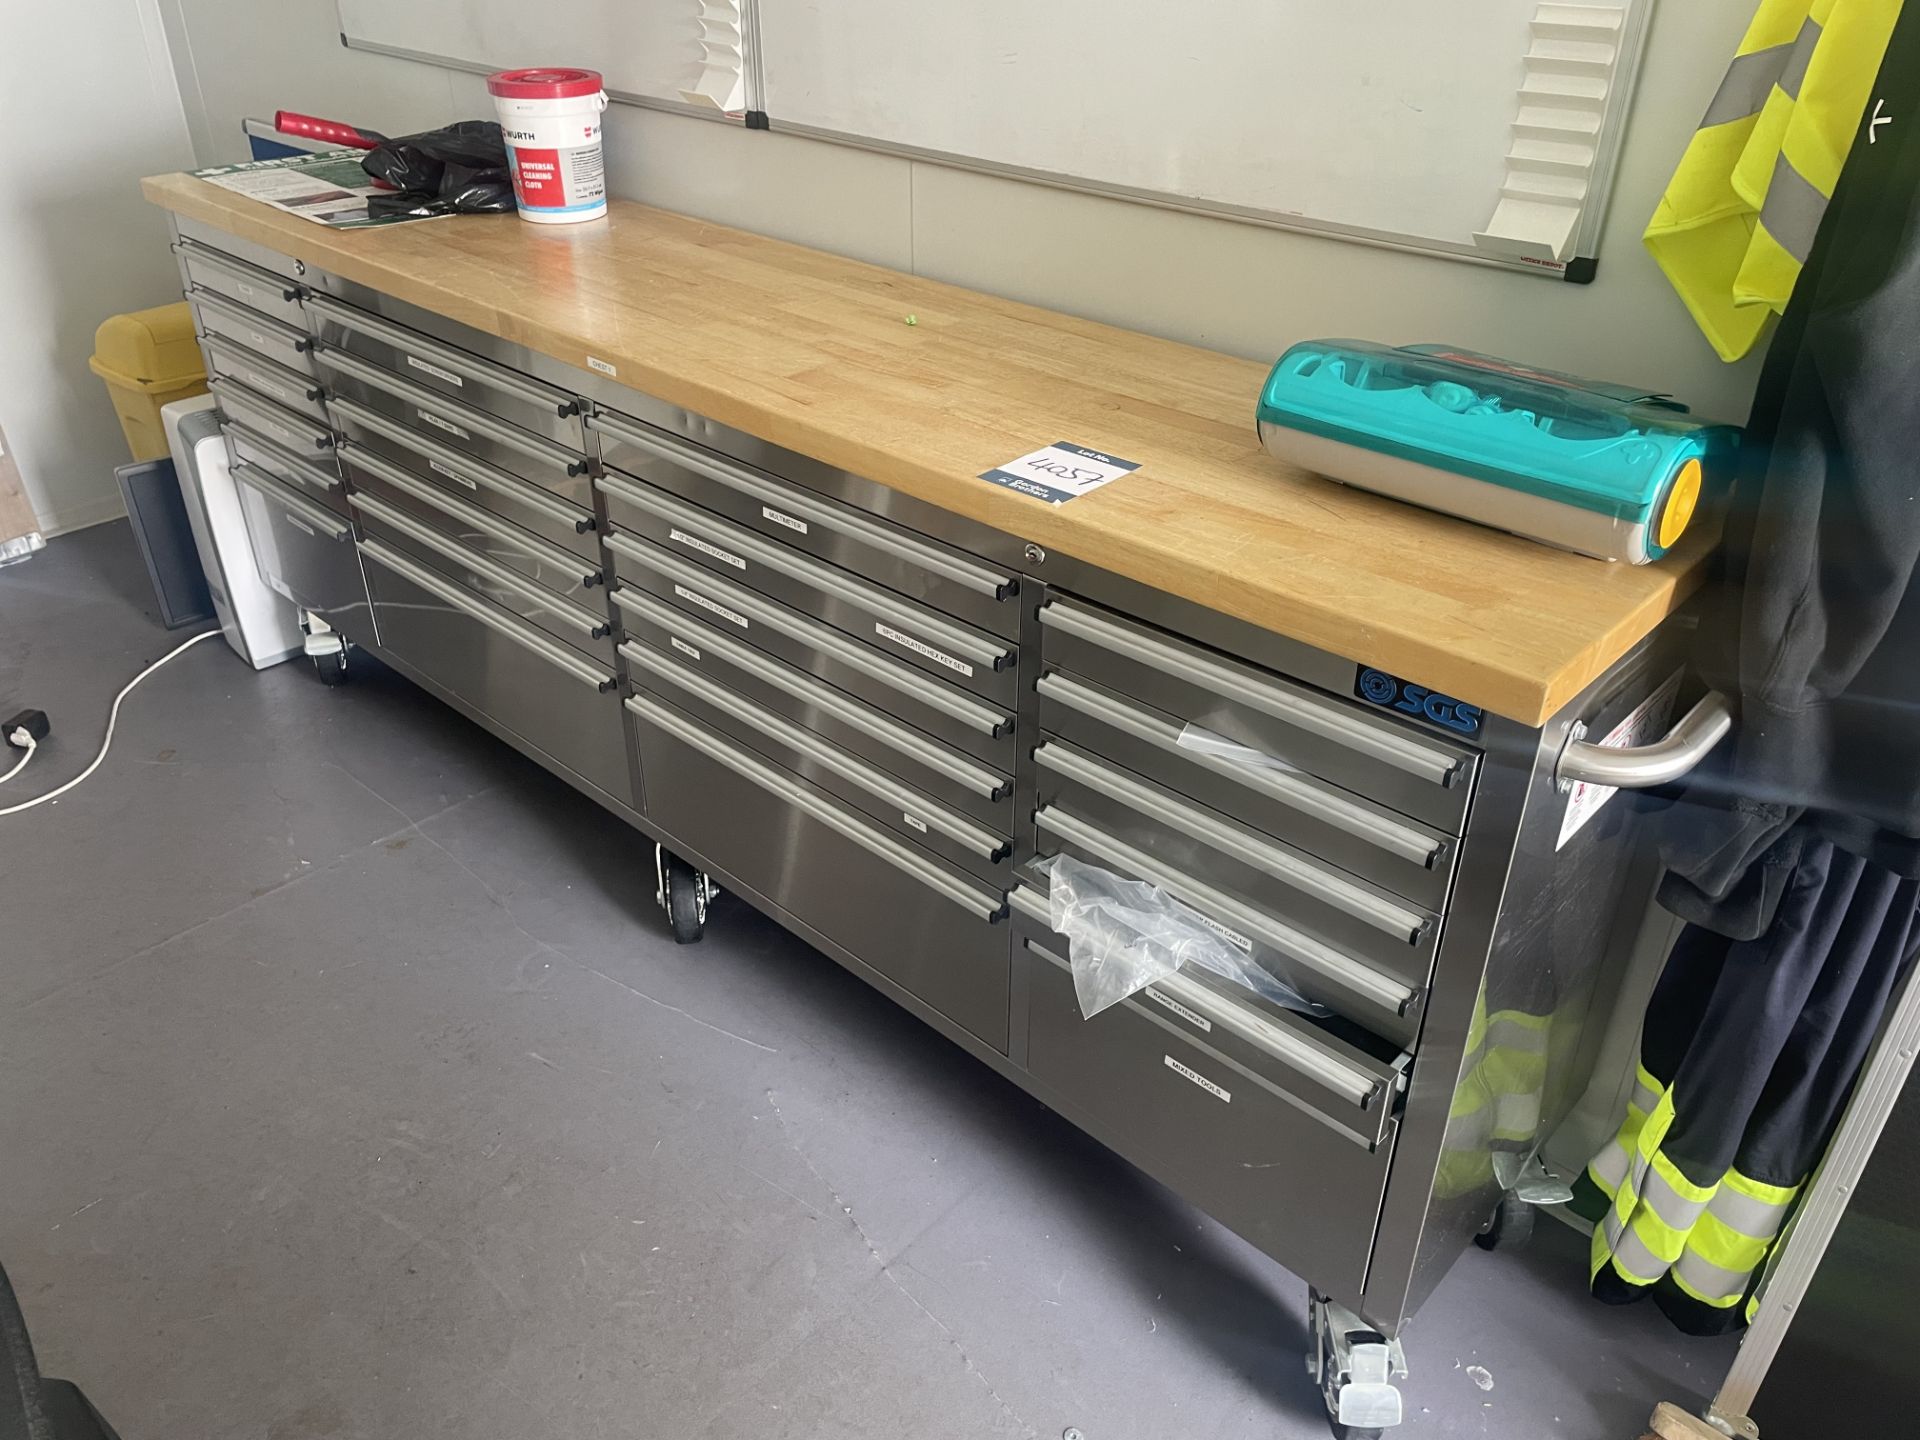 Multi-drawer tool storage cabinet on wheels, desks and shelving